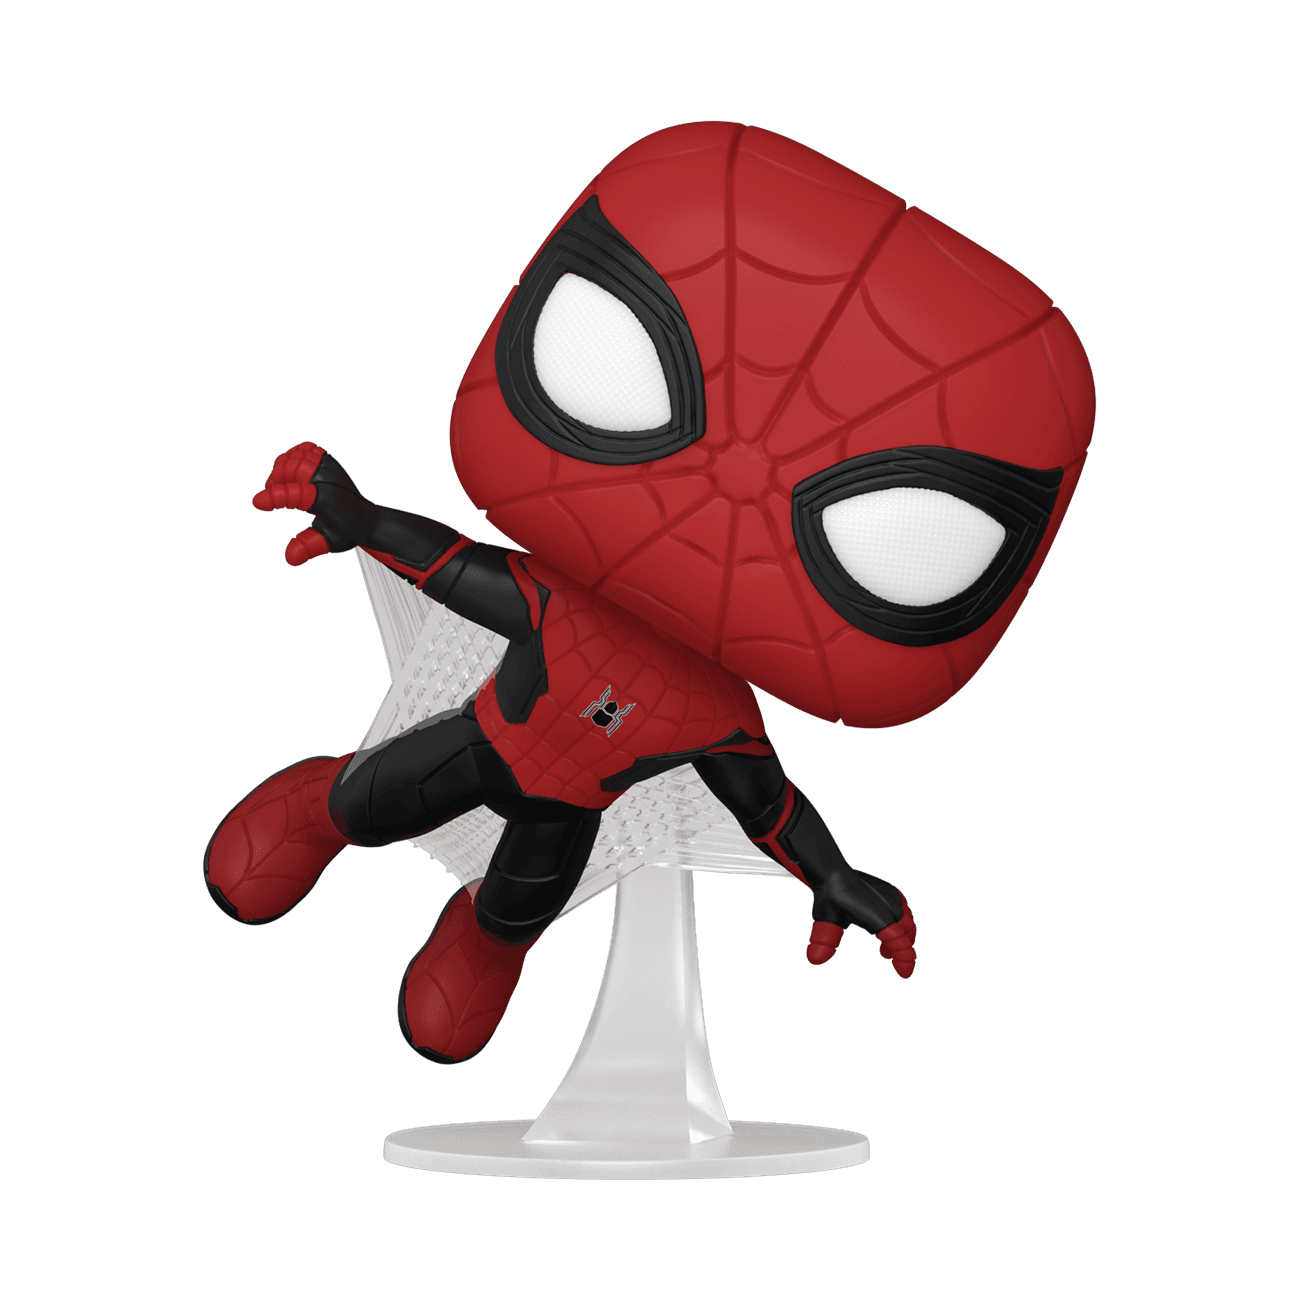 Buy Pop! Spider-Man Upgraded Suit at Funko.